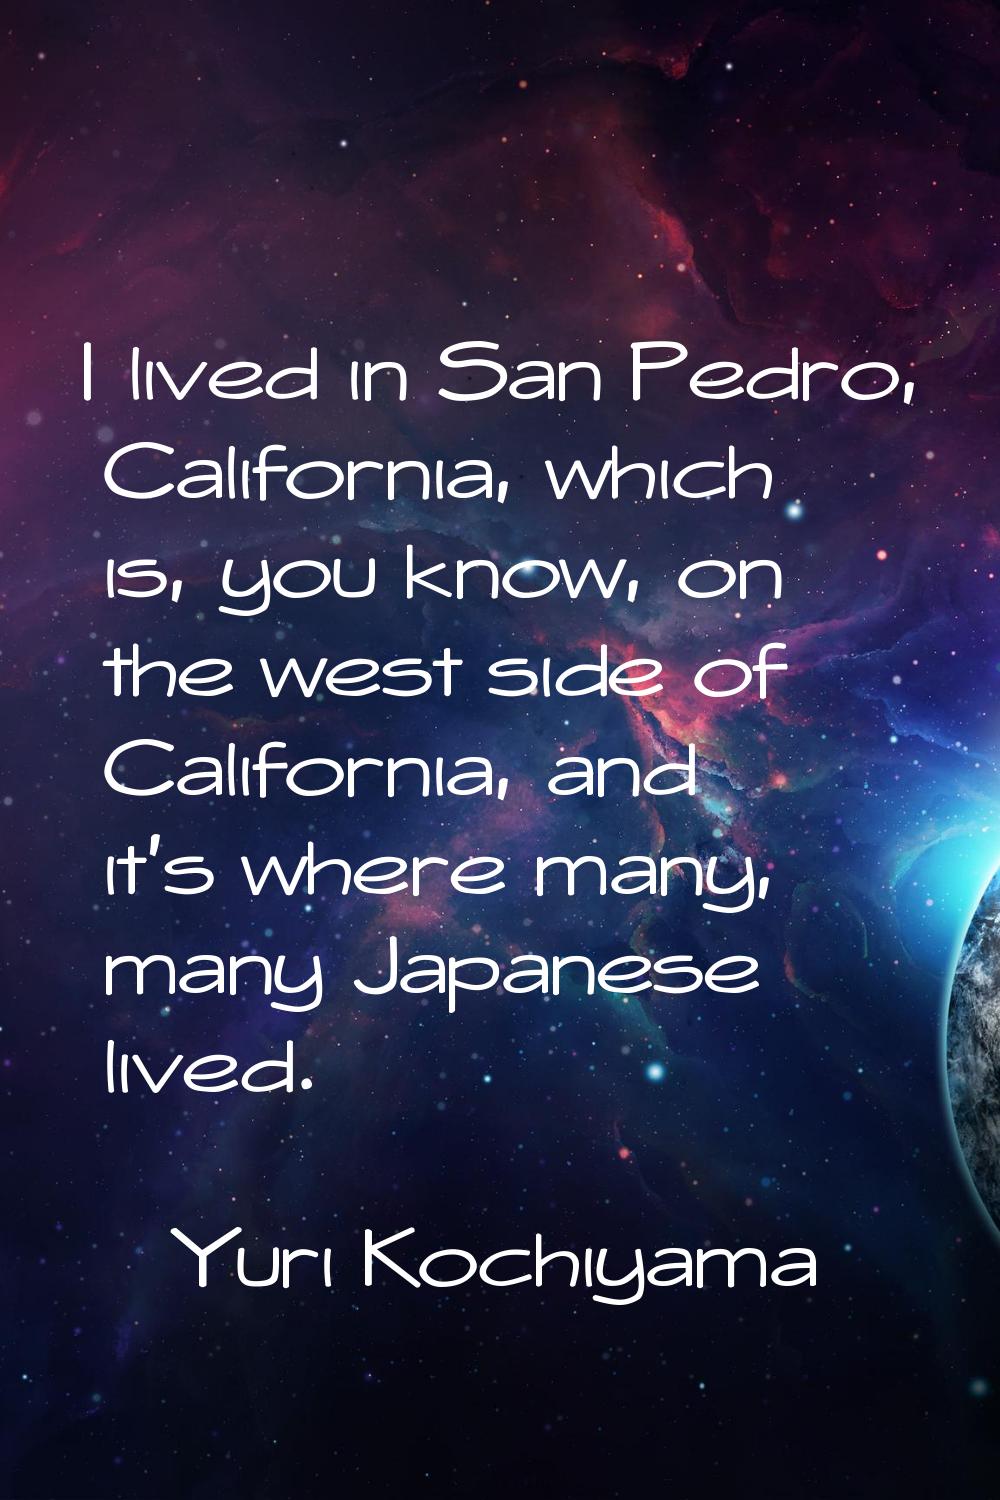 I lived in San Pedro, California, which is, you know, on the west side of California, and it's wher